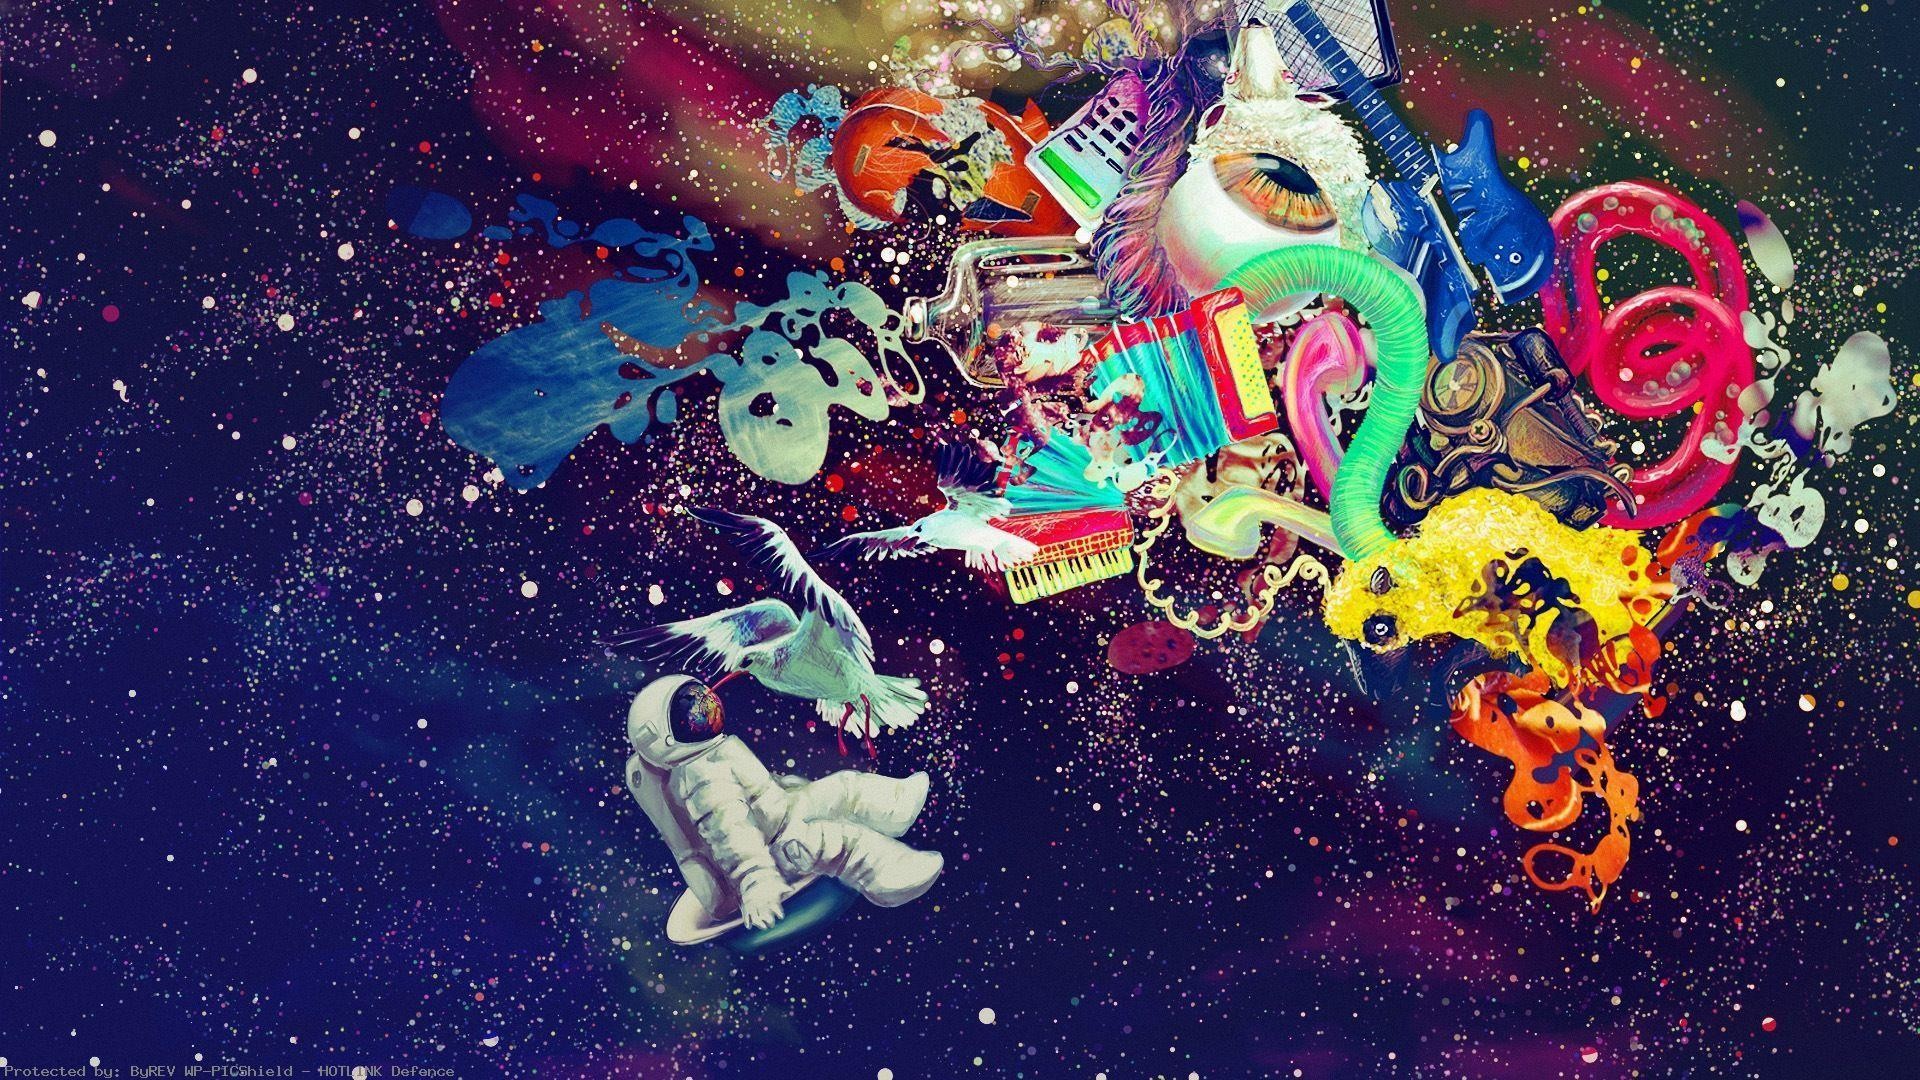 Trippy-Hd-Tumblr-trippy-space-cave-wallpaper-wp38011402